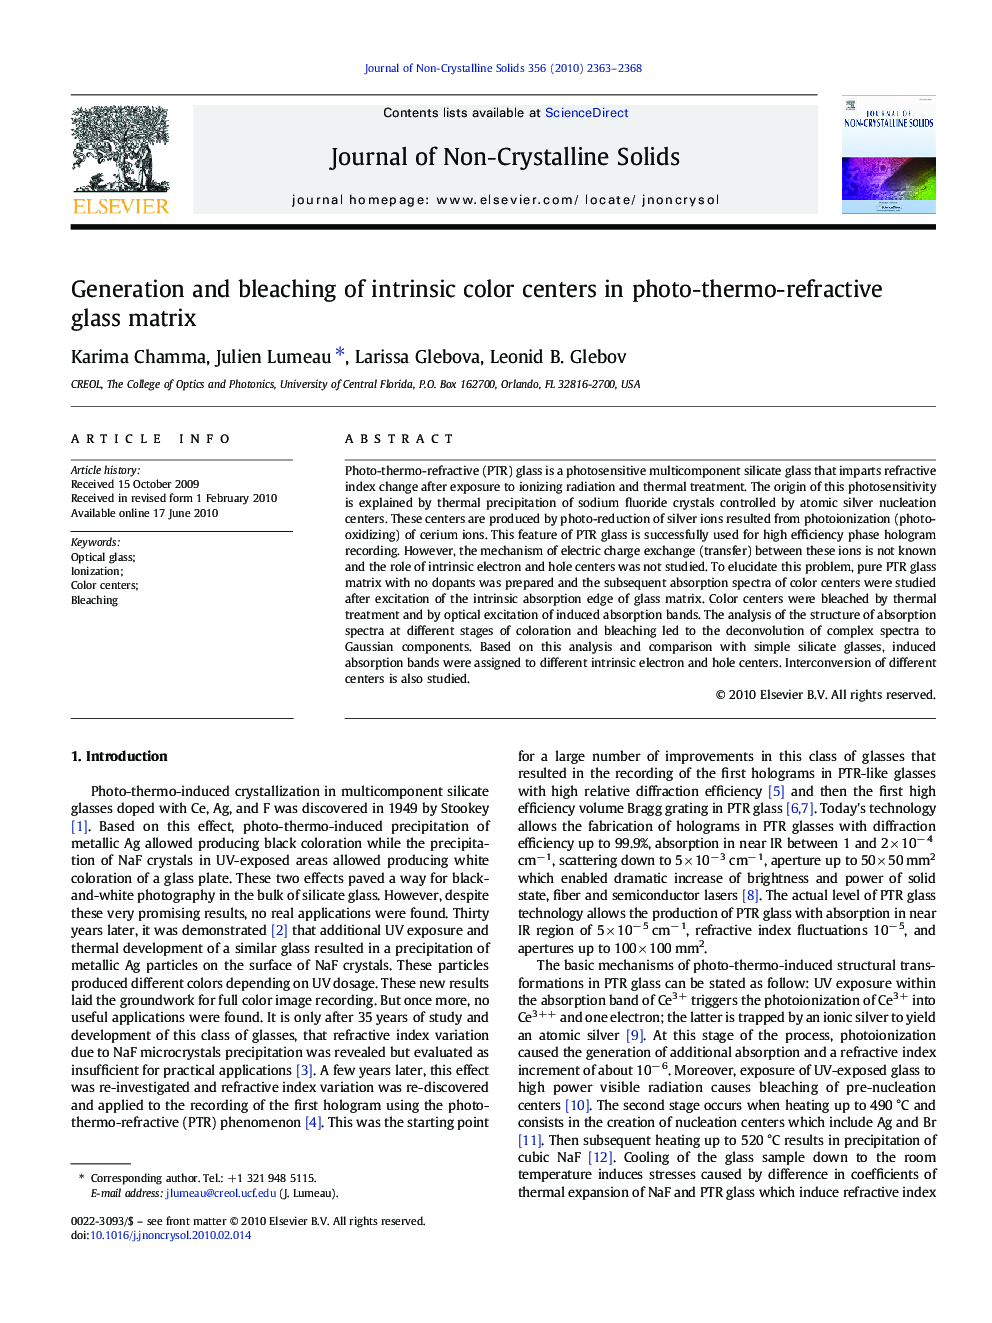 Generation and bleaching of intrinsic color centers in photo-thermo-refractive glass matrix